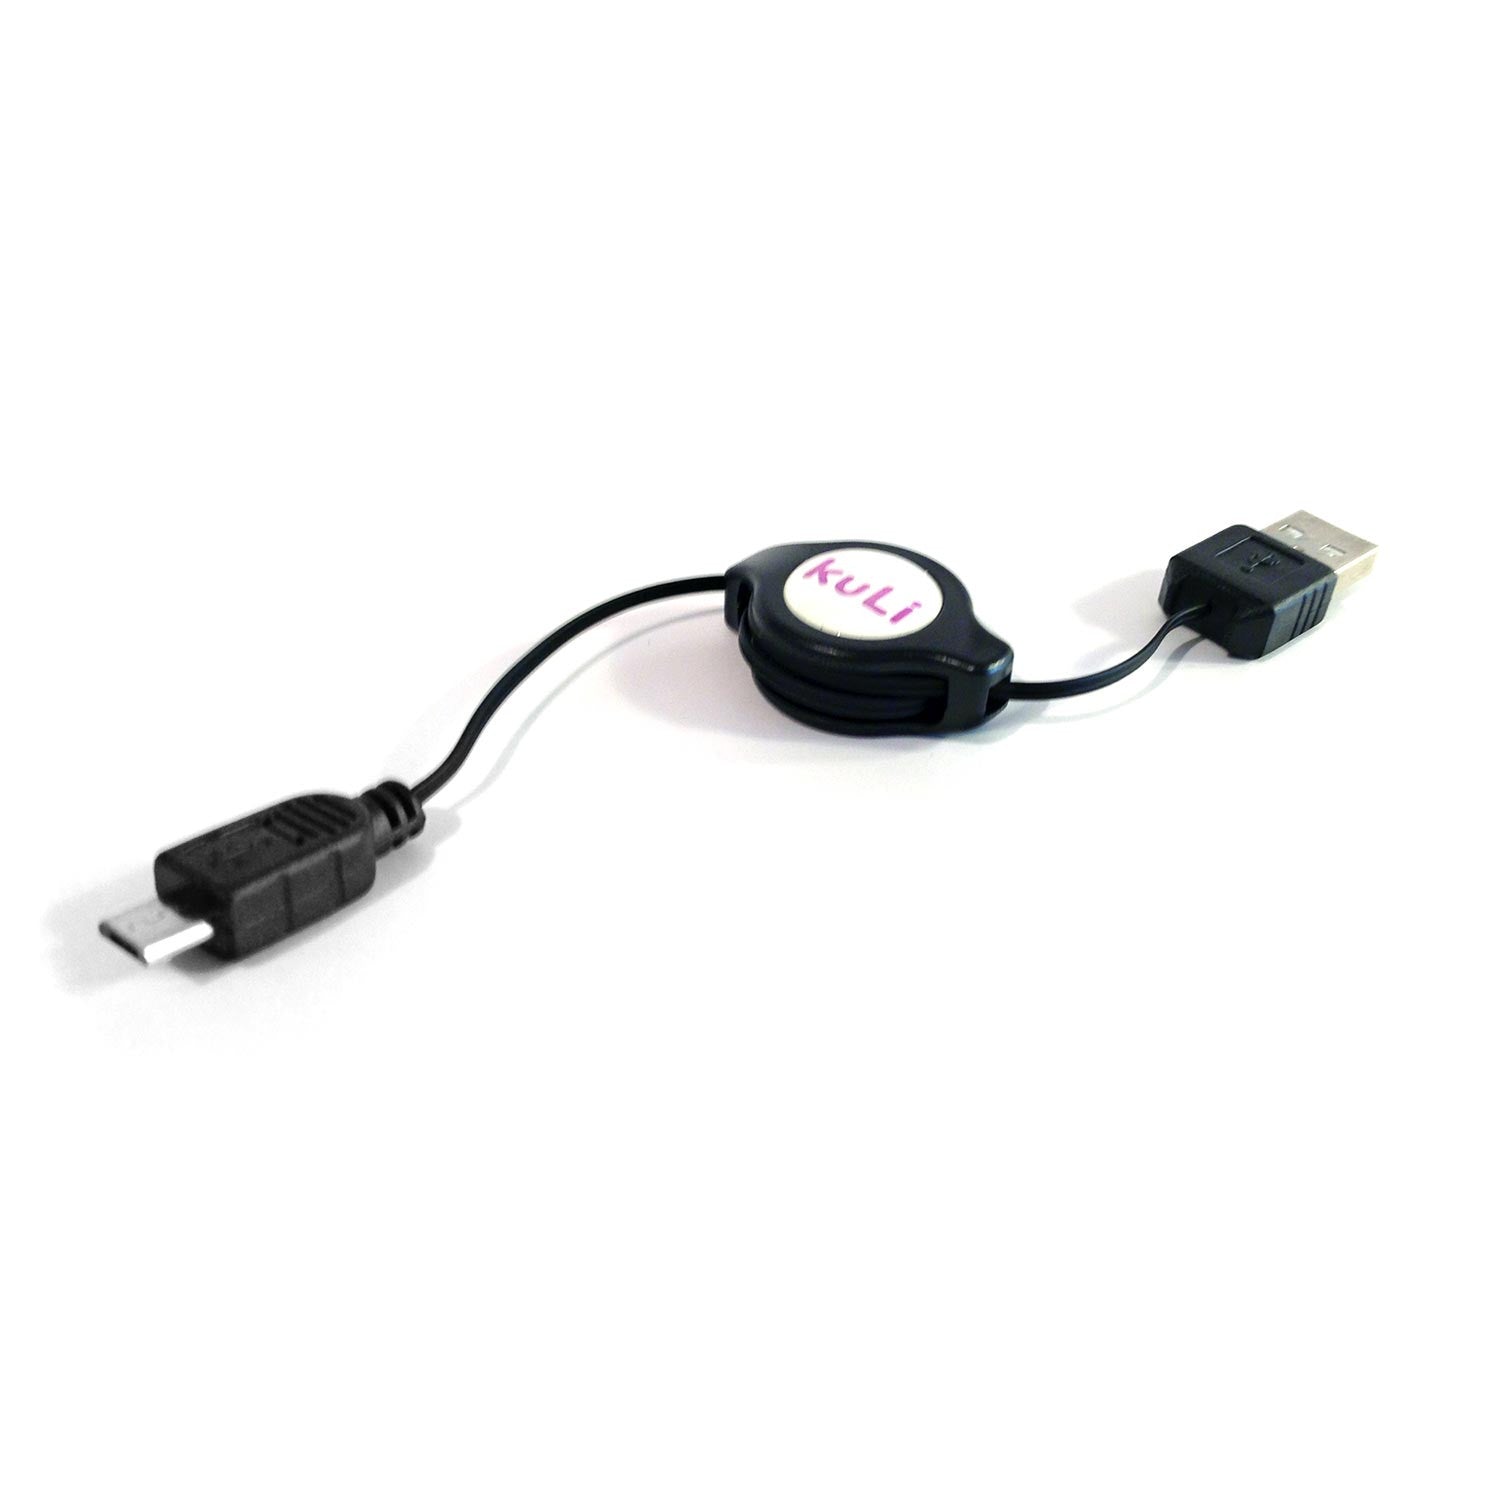 replacement USB kuLi charger